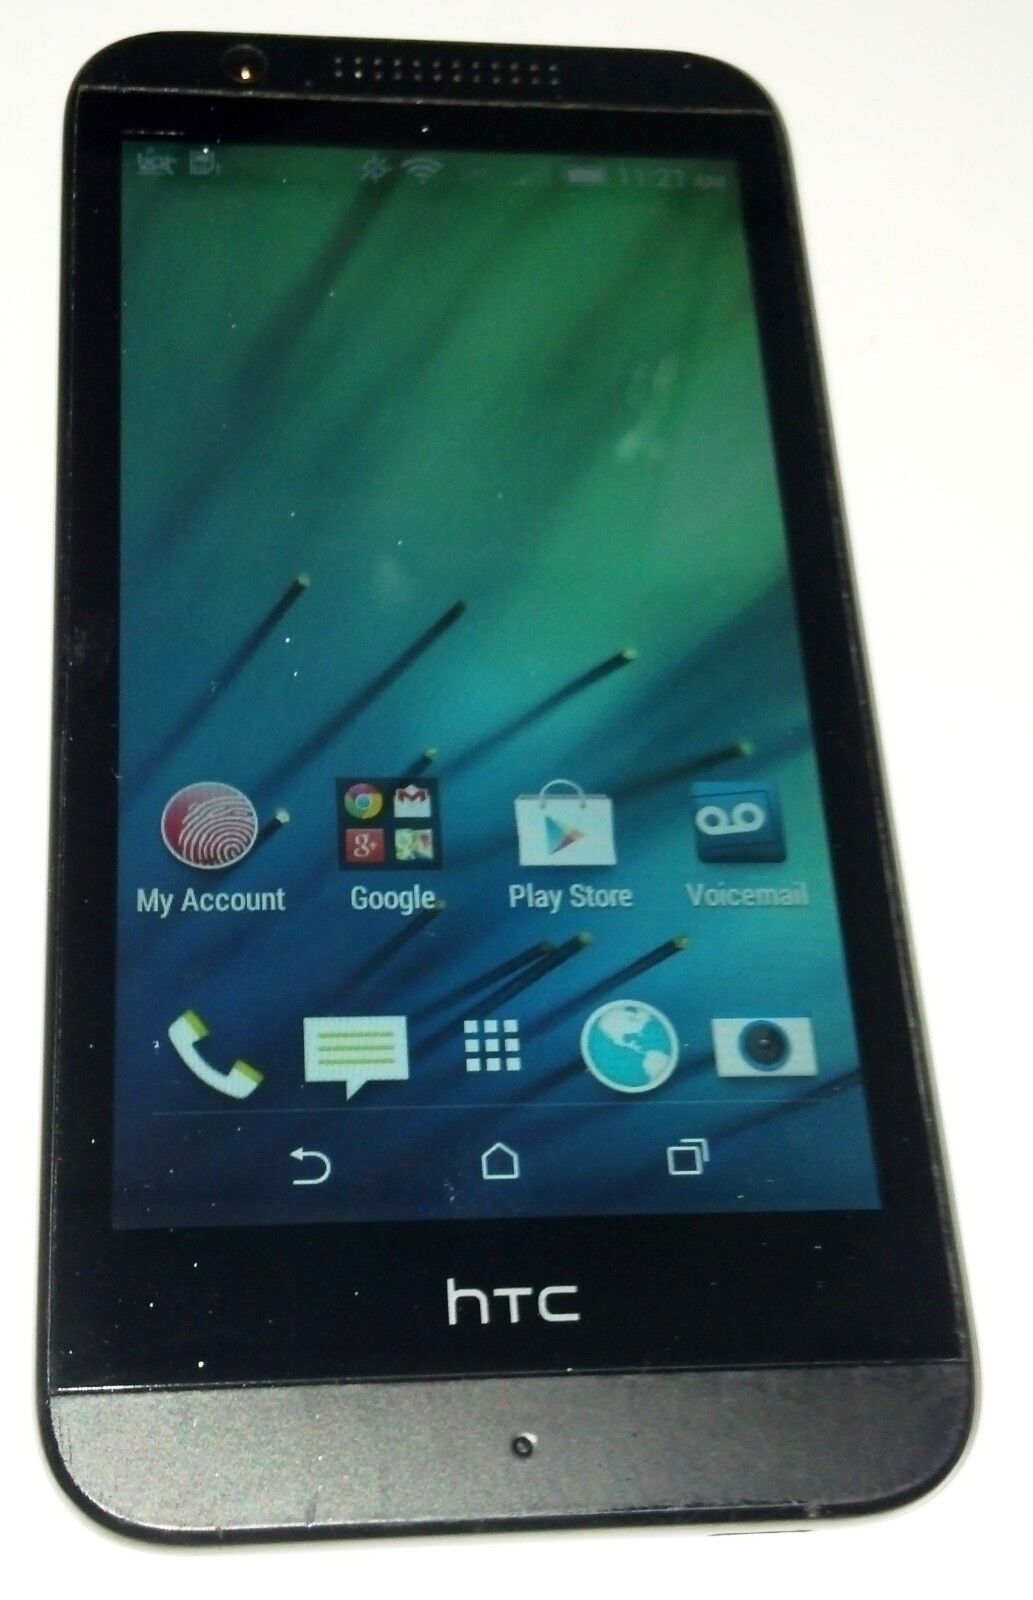 HTC Desire 510 4G LTE Black Virgin Mobile Android Smartphone - Great Condtion Без бренда Desire 4G